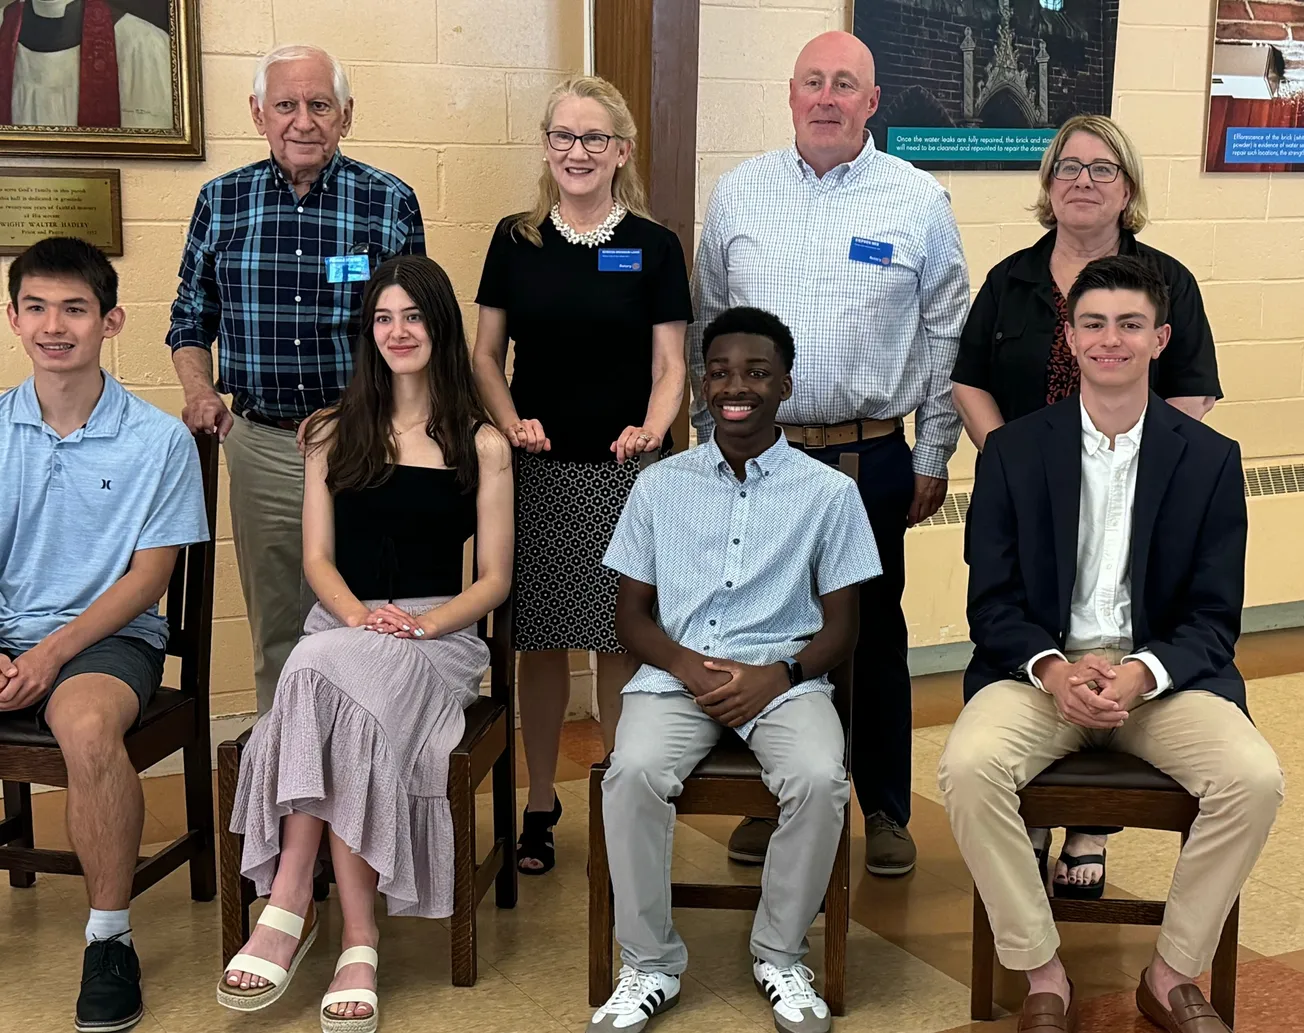 Winchester Rotary hands out scholarships